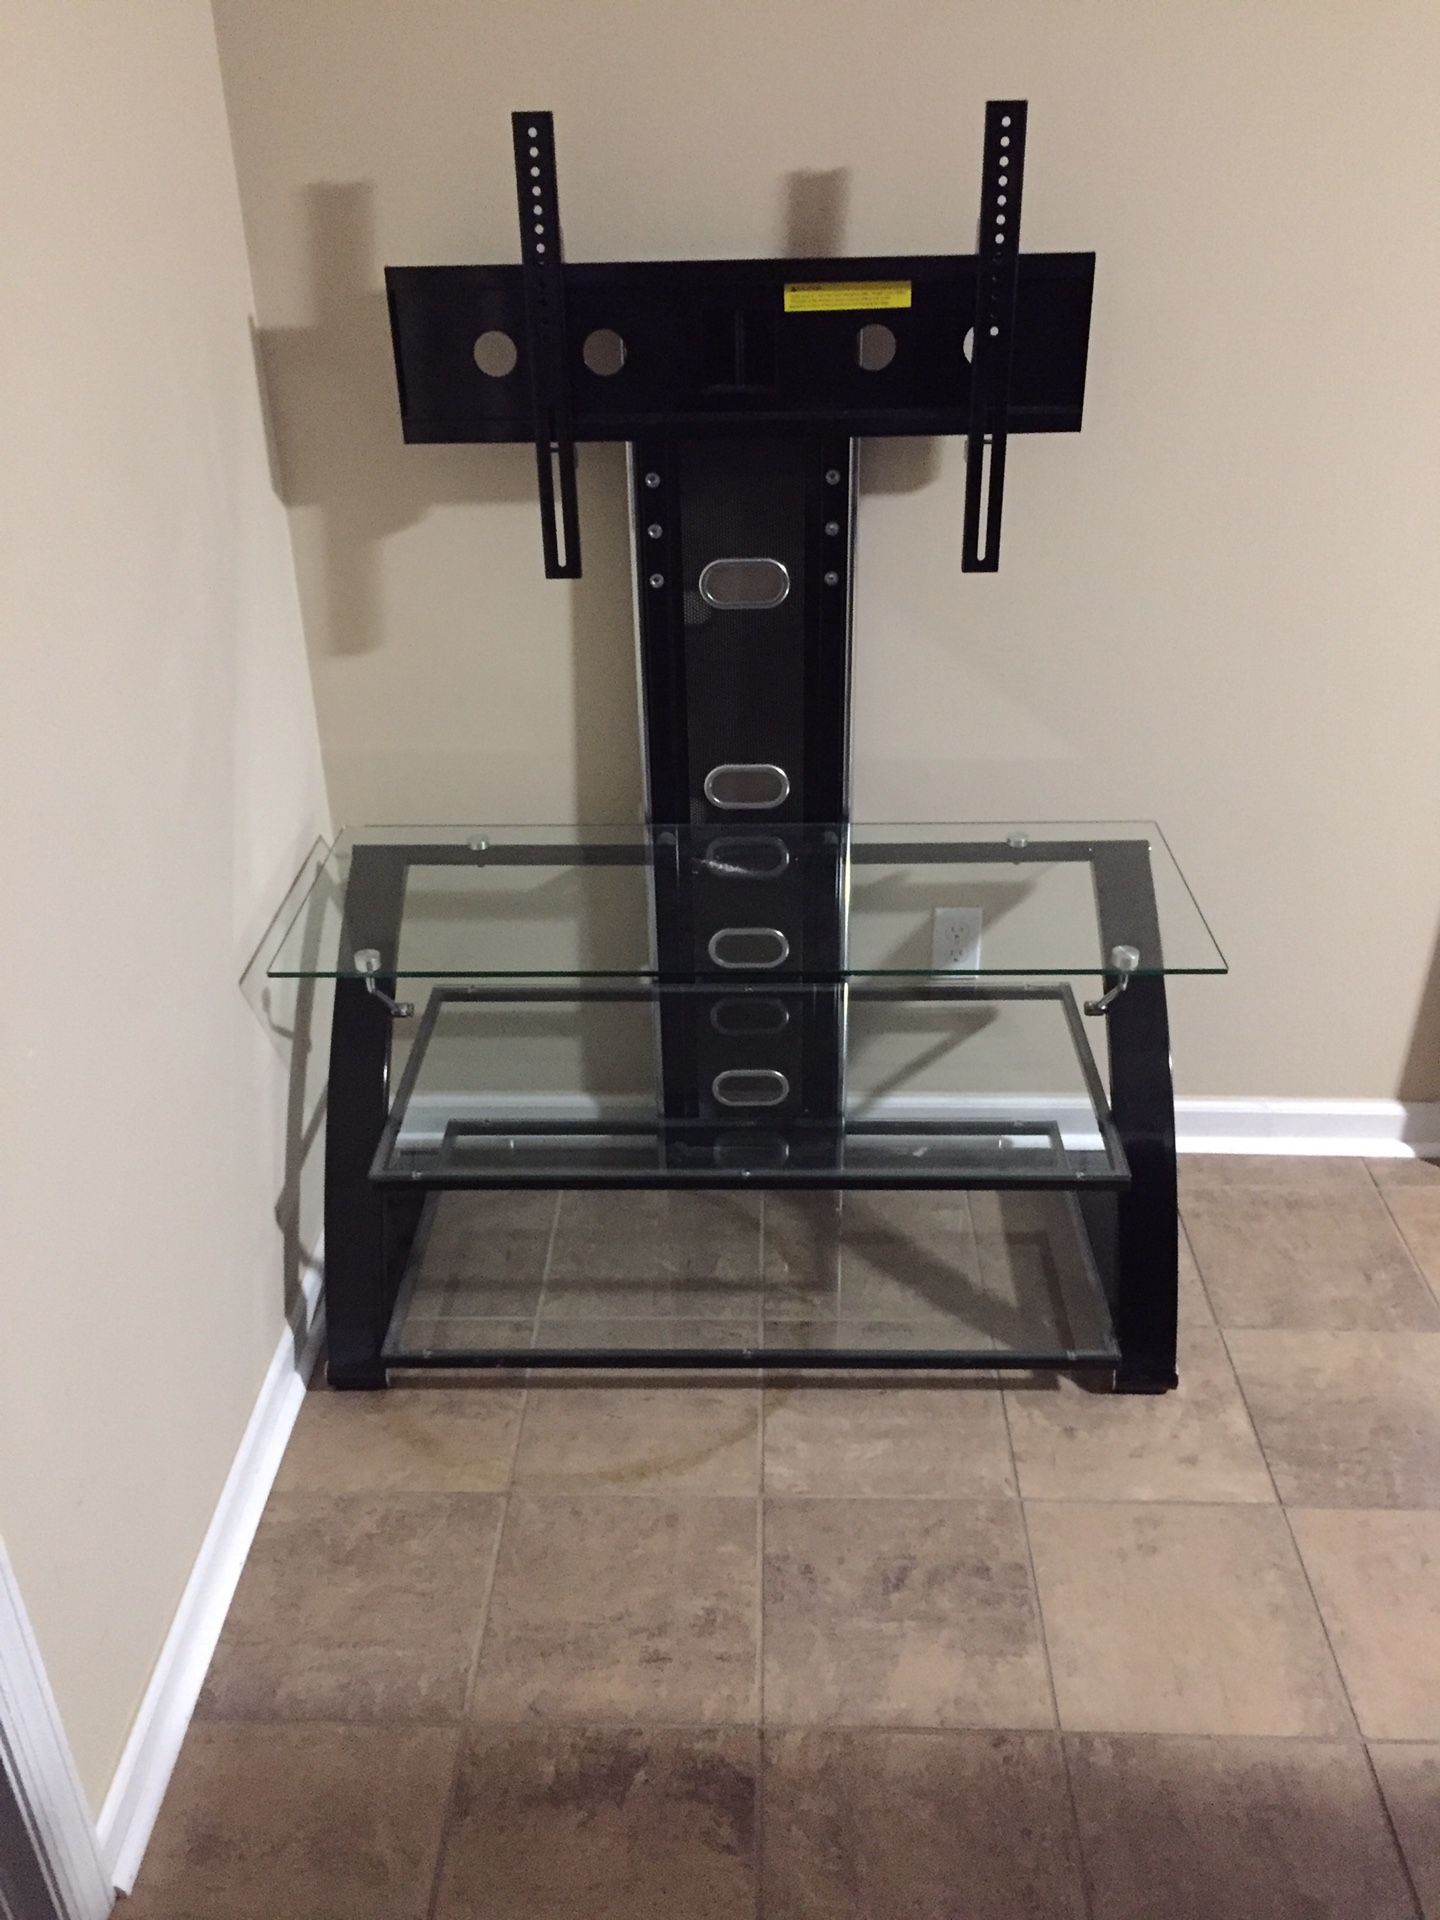 Glass Flatscreen Tv Stand... Like NEW !!! No scratches at all! $70